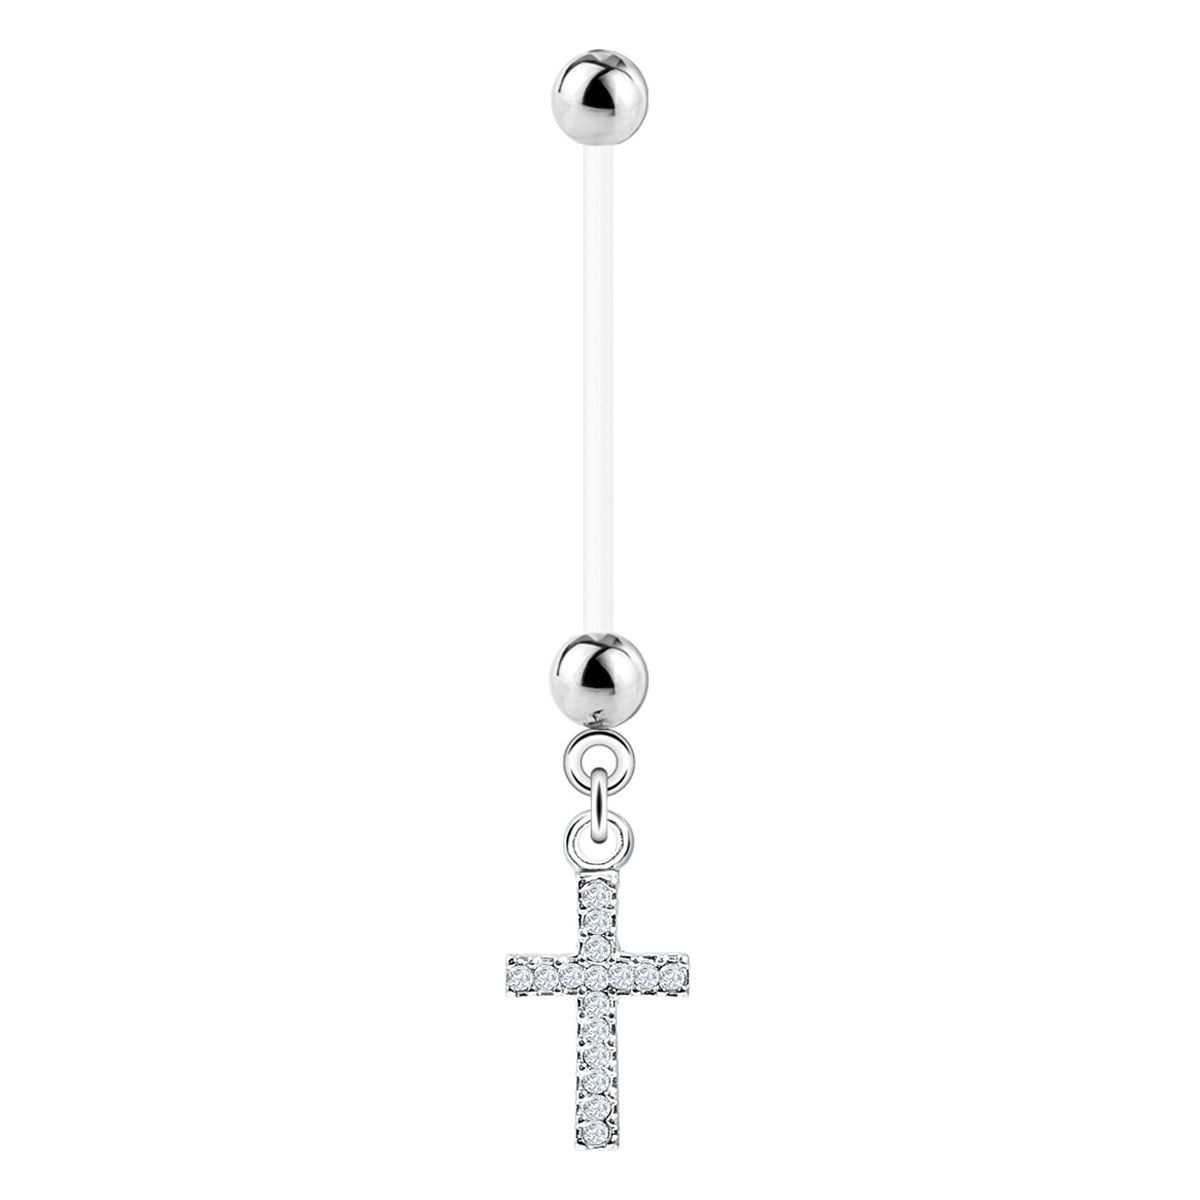 Pregnancy belly button ring with studded cross dangle